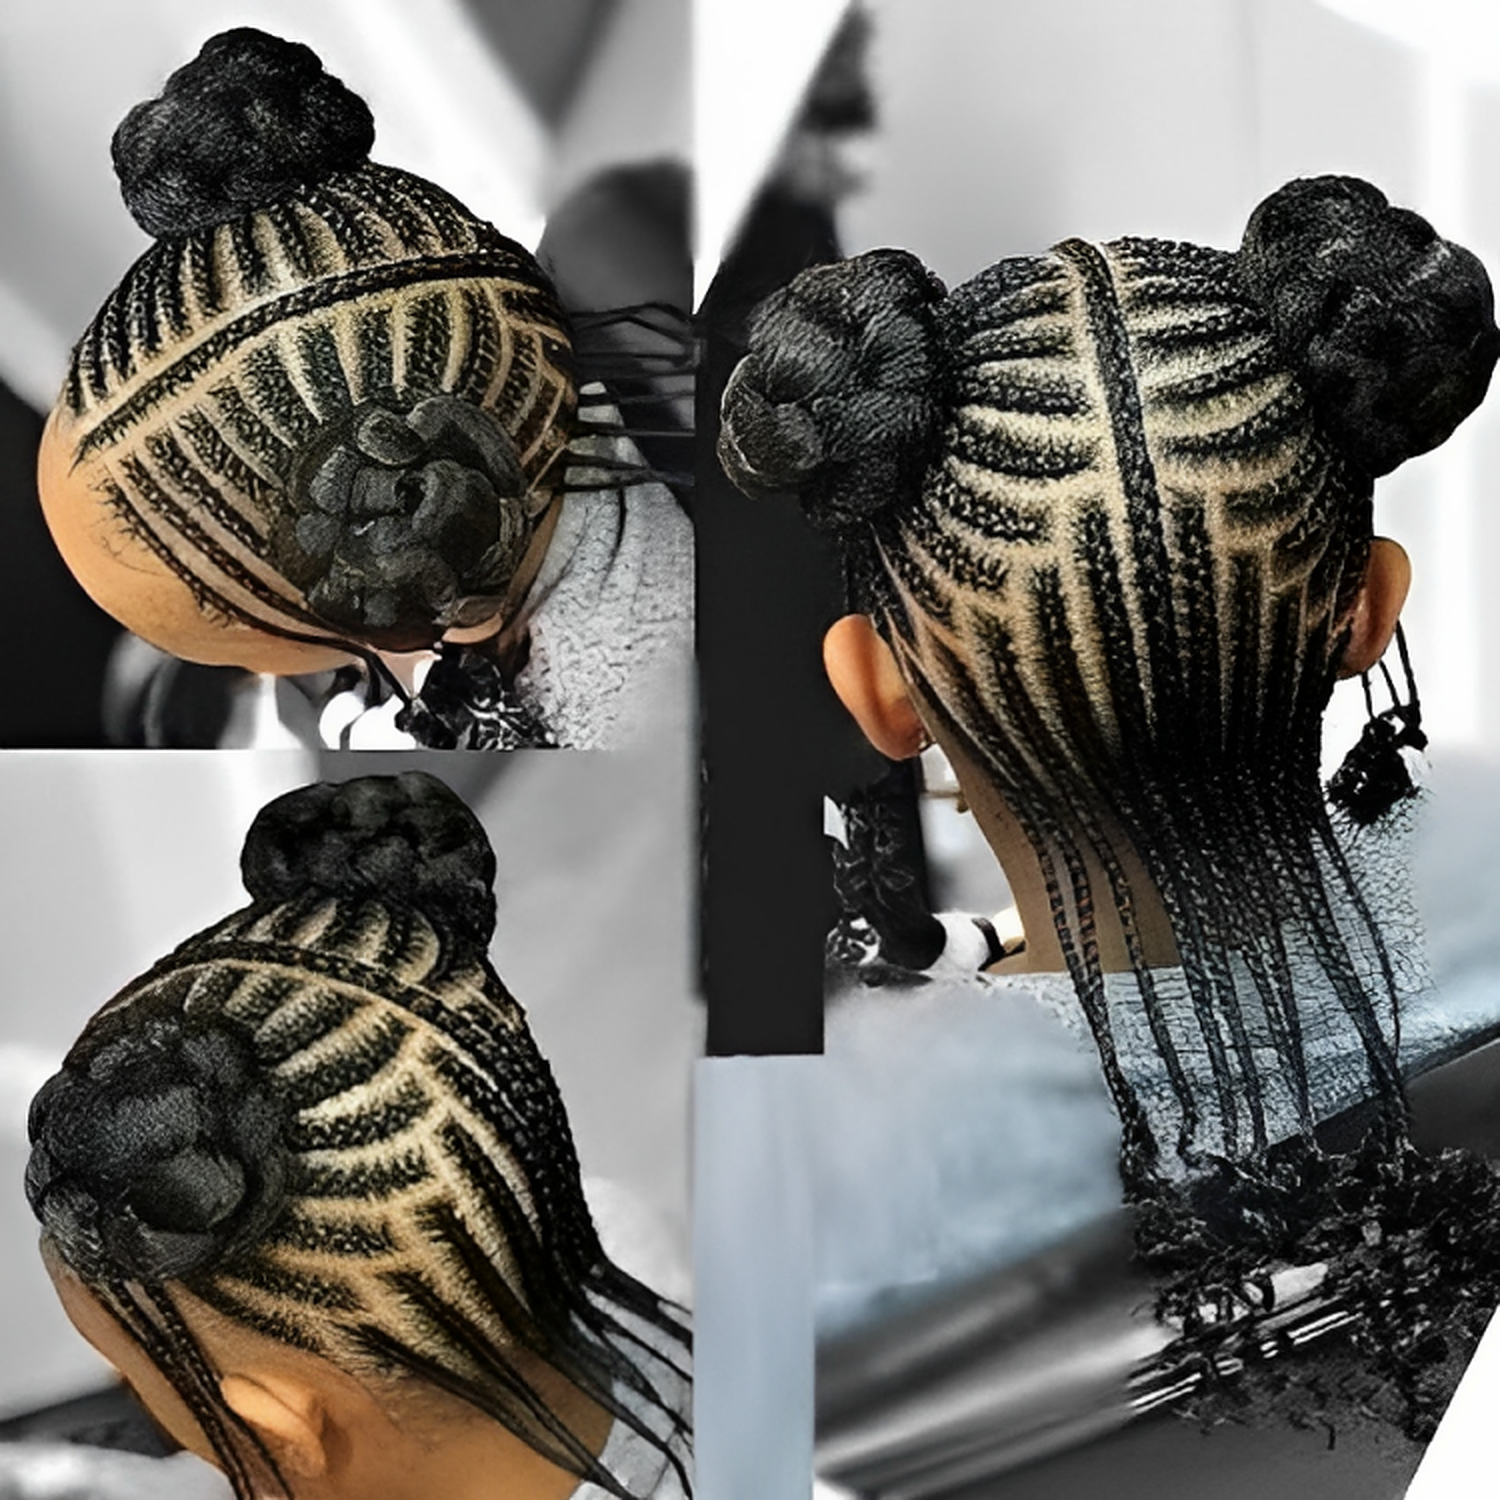 rubber band hairstyles - Google Search | High ponytail hairstyles, Twist  braid hairstyles, Rubber band hairstyles